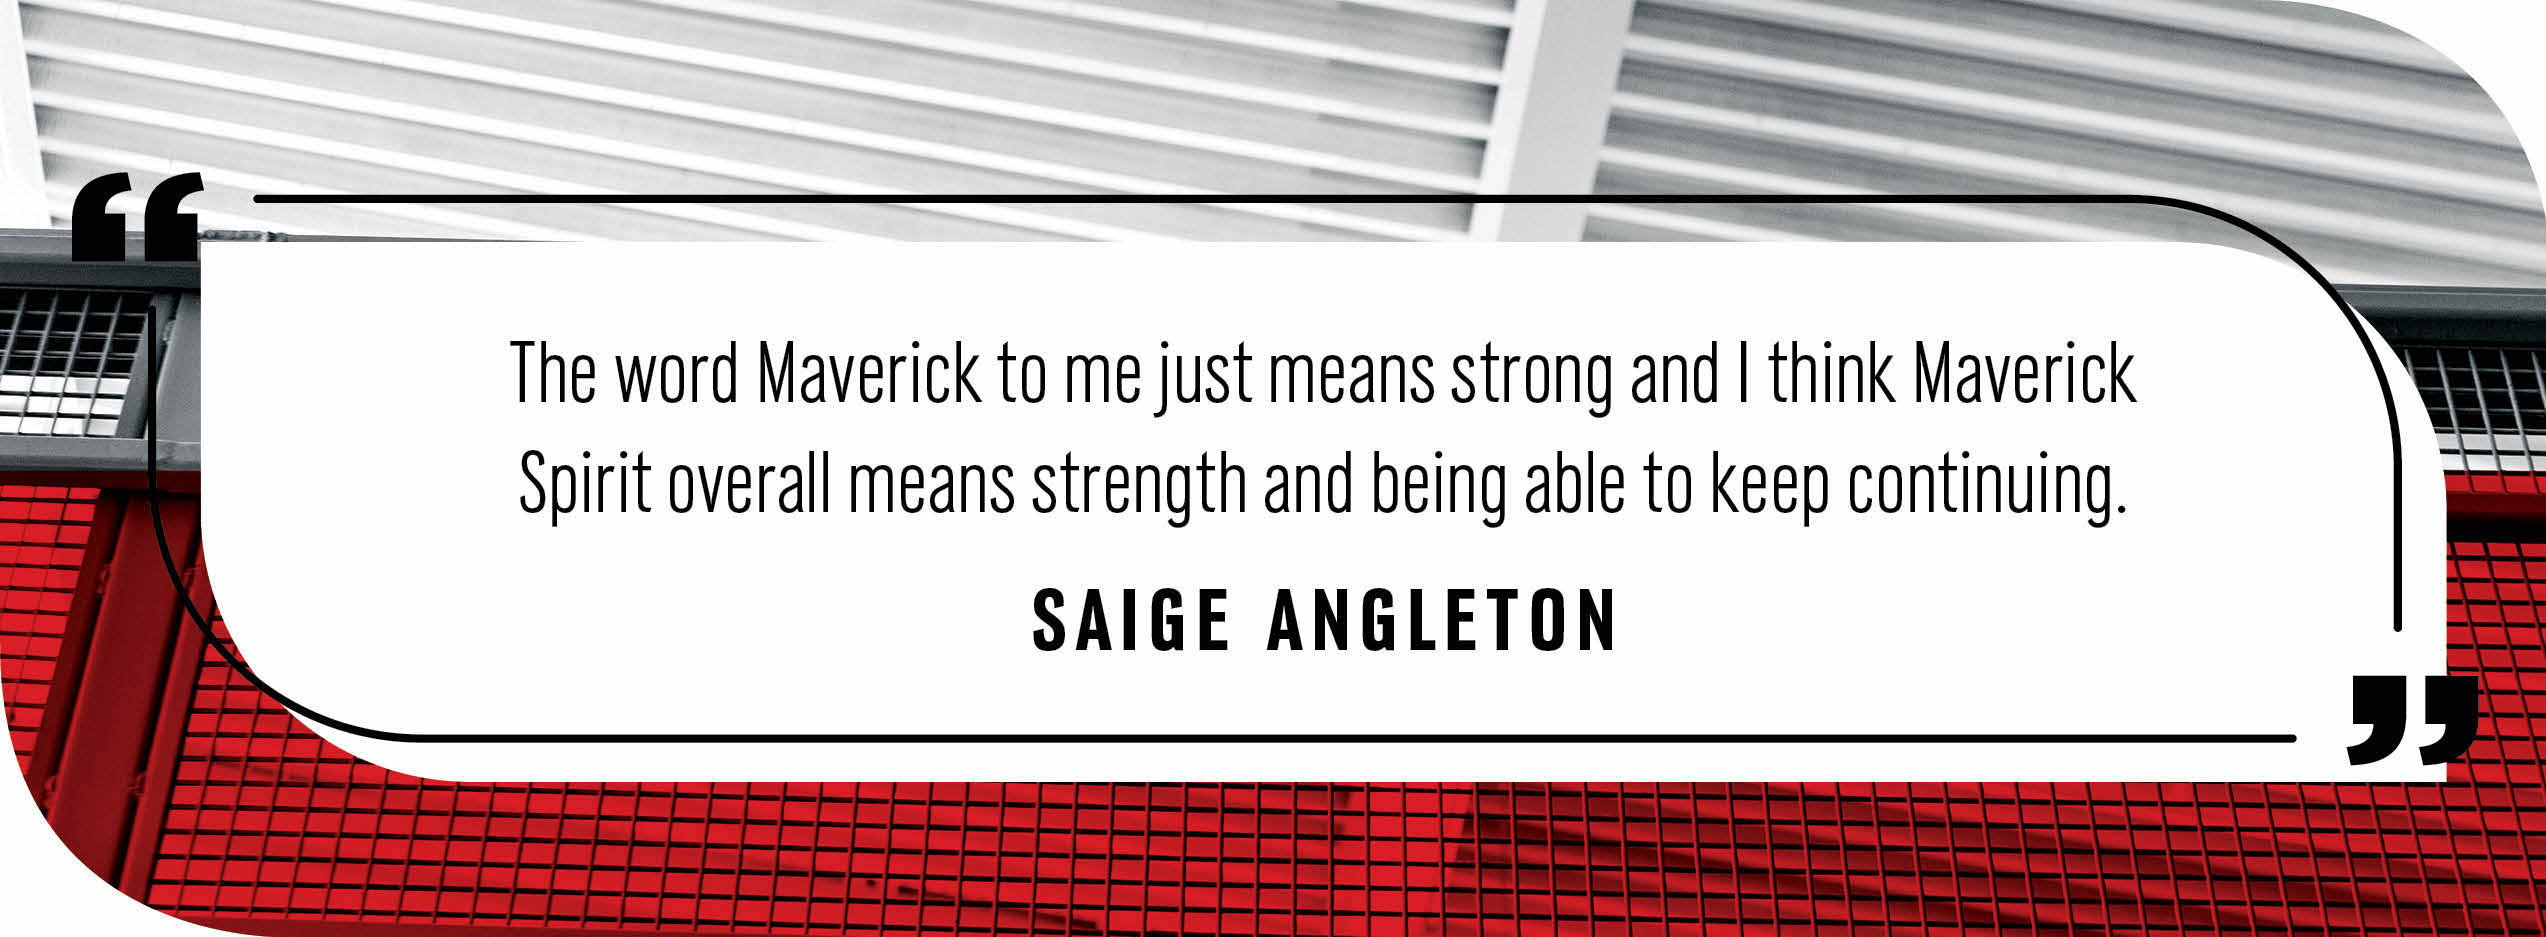 Quote by Saige Angleton: "The word Maverick to me just means strong and I think Maverick Spirit overall means strength and being able to keep continuing."